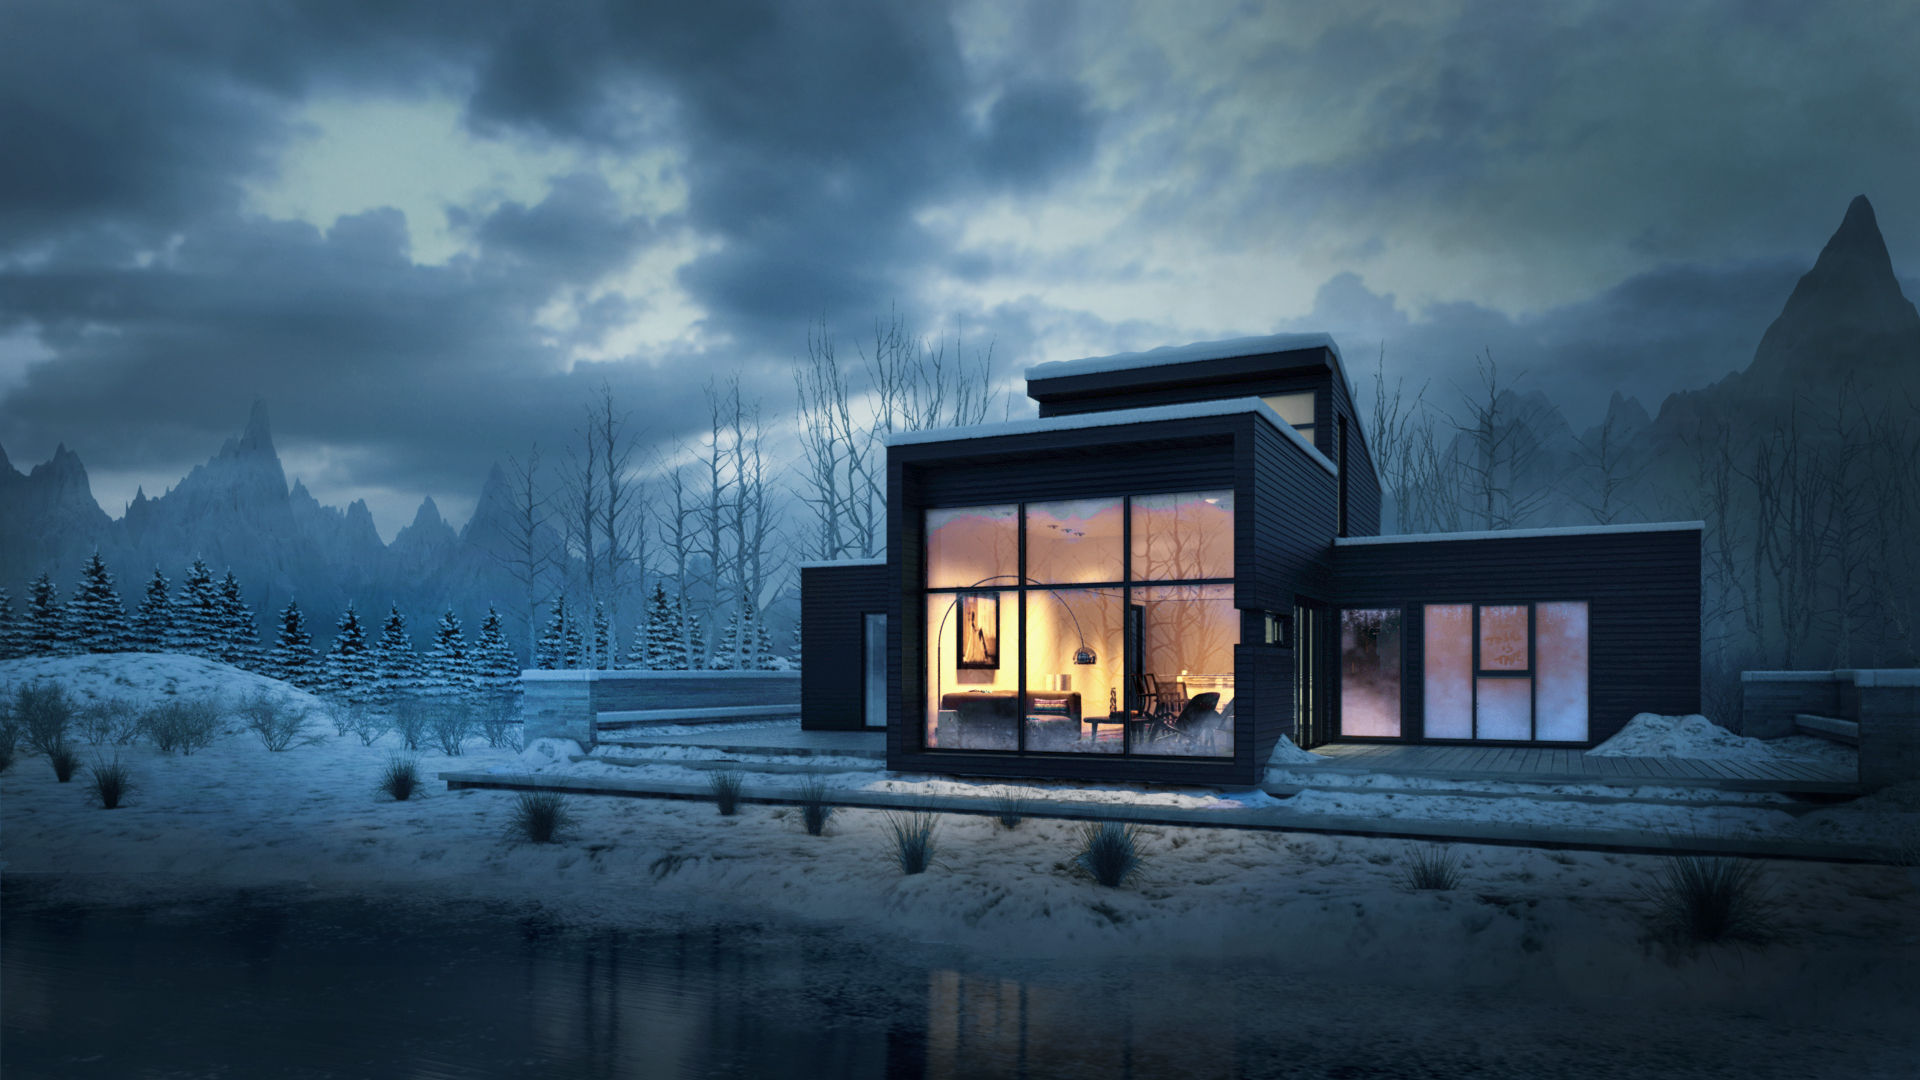 General 1920x1080 architecture modern nature landscape house trees winter snow mountains lake pine trees clouds lights